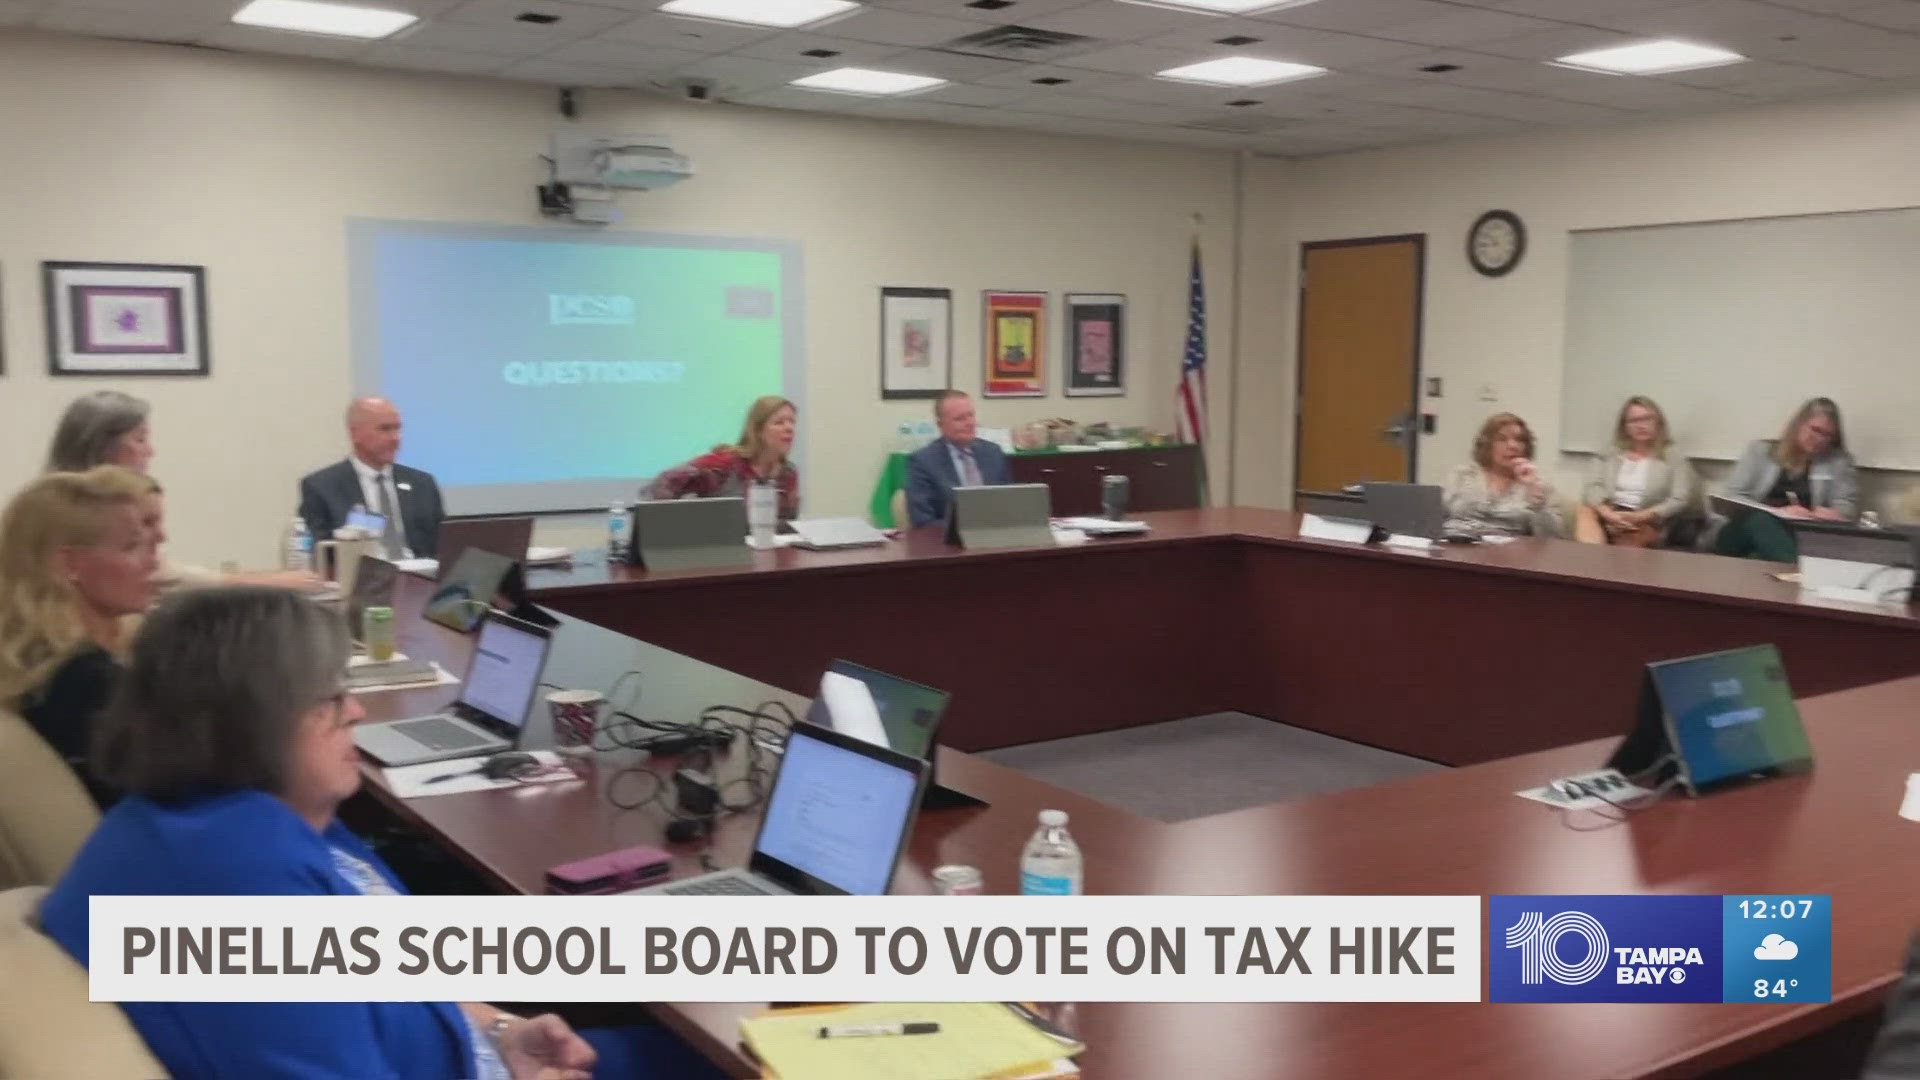 Pinellas County residents would pay more in property taxes if approved, with the money going towards public school staff raises and materials for students.